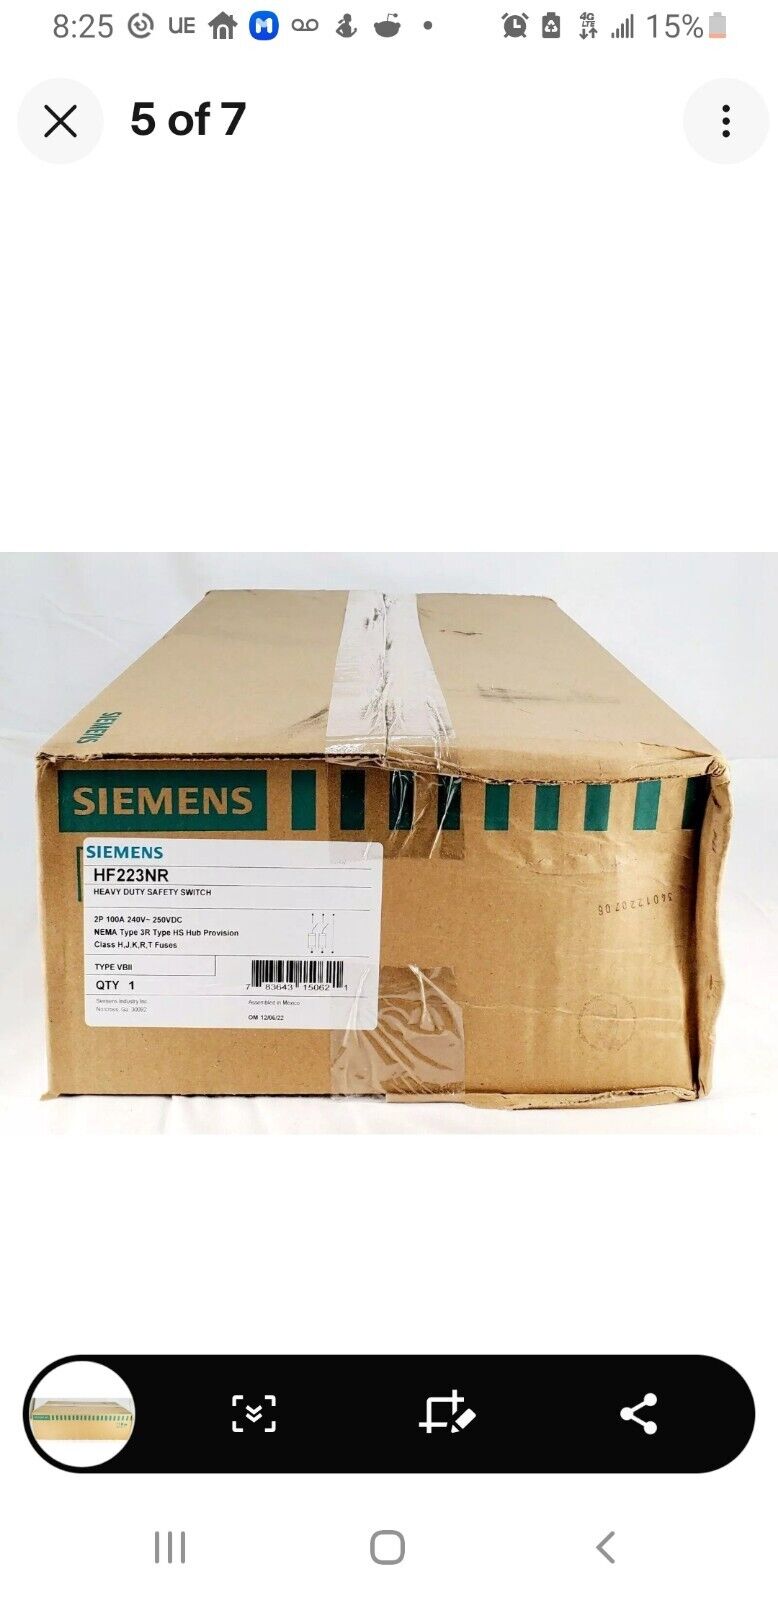 Siemens HF223NR 100 Amp - 2 Pole - 240 volt 3 Wire Fused Heavy Duty Switch New